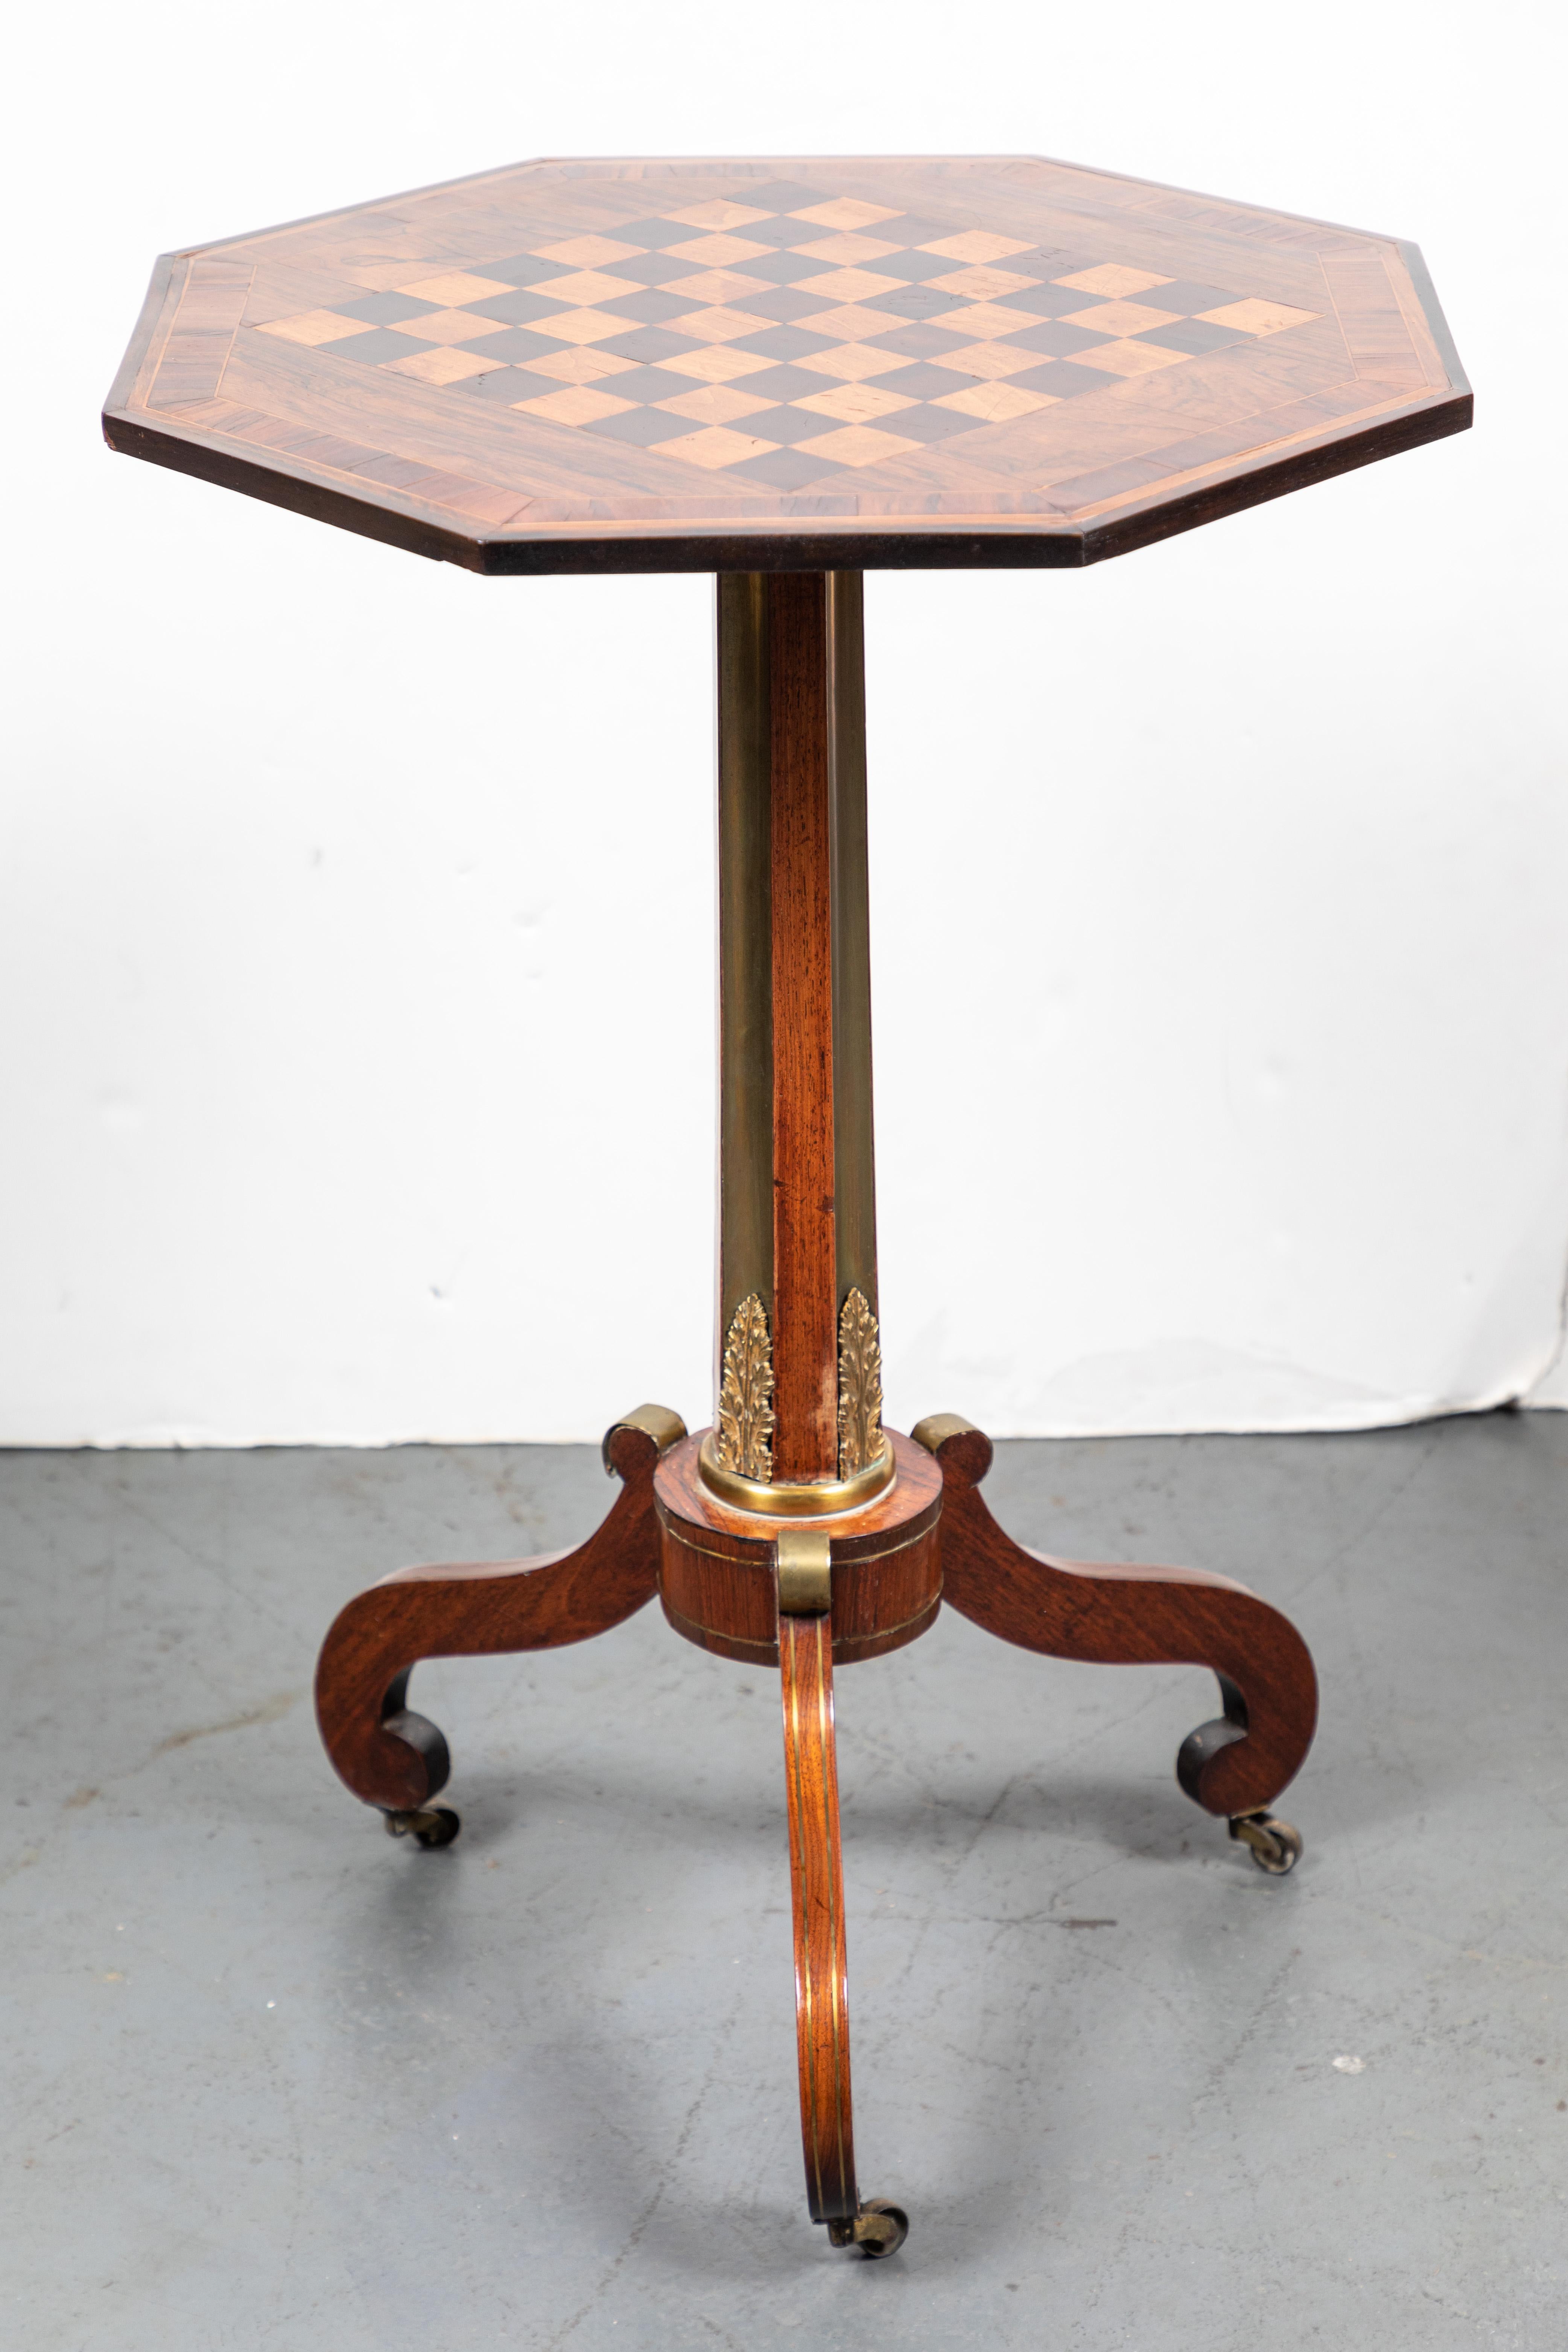 Inlaid, Antique, English Side Table In Good Condition For Sale In Newport Beach, CA